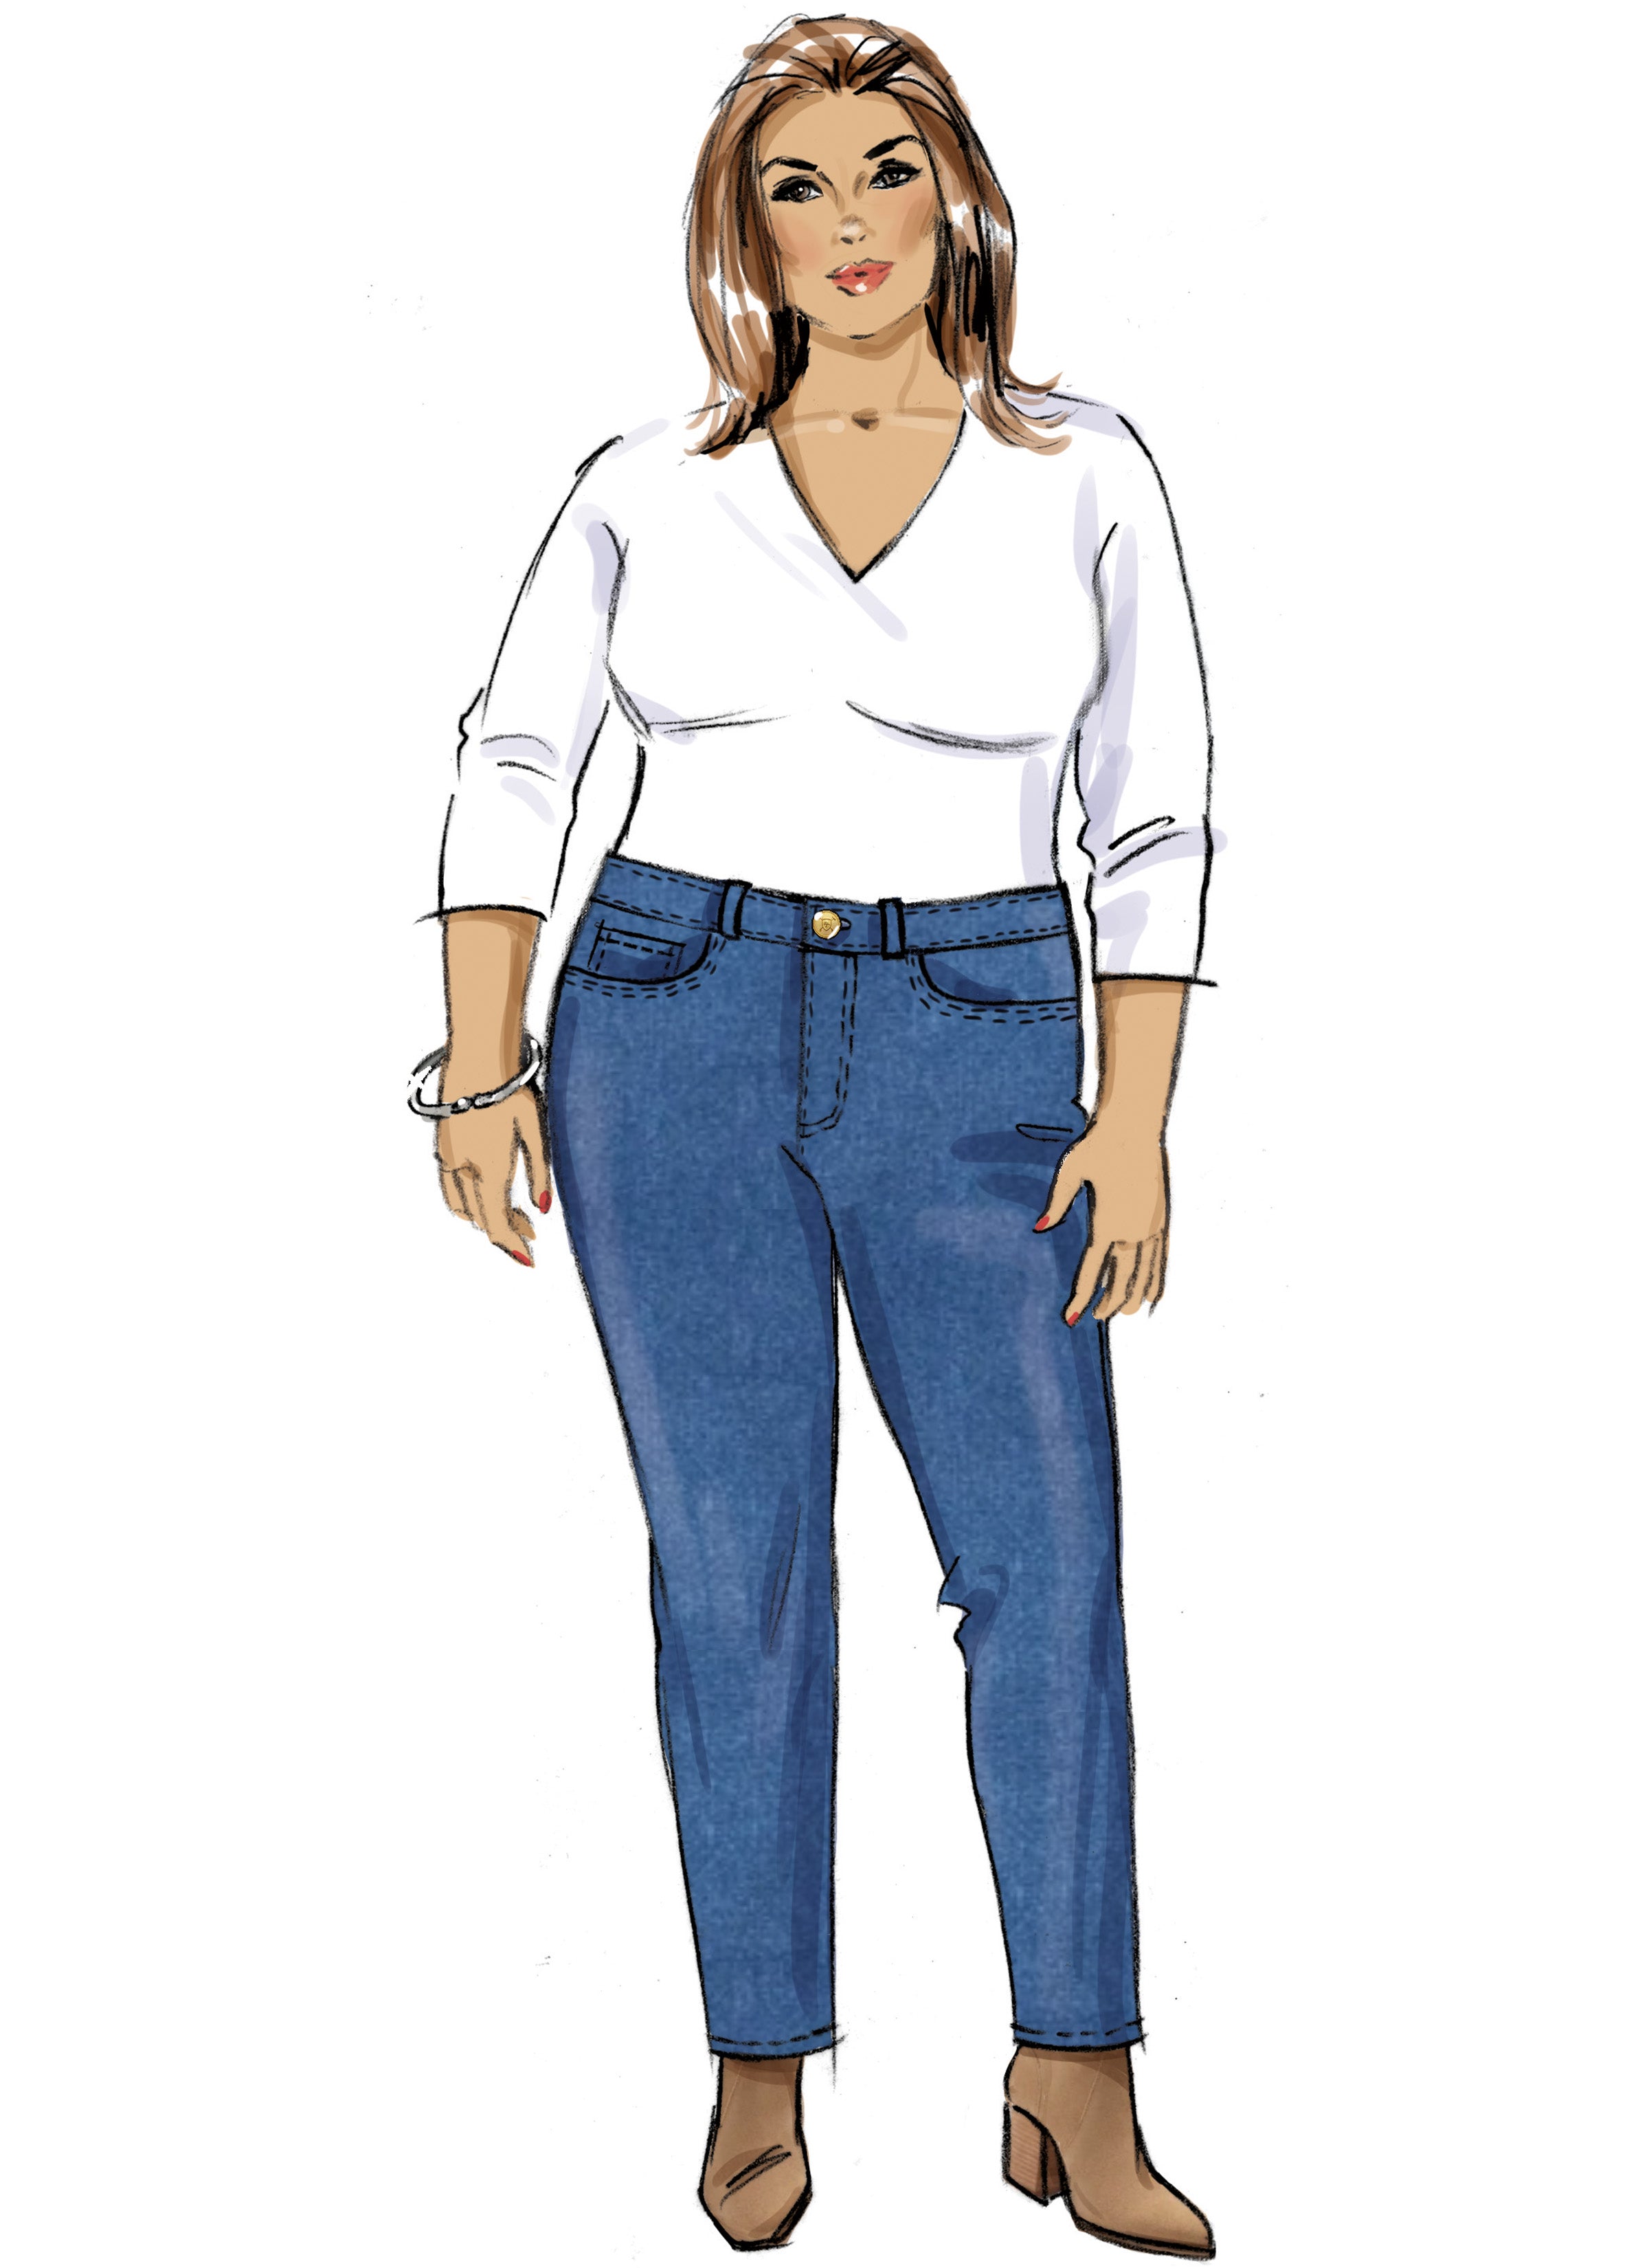 Butterick sewing pattern 6912 Women's Jeans by Palmer/Pletsch from Jaycotts Sewing Supplies